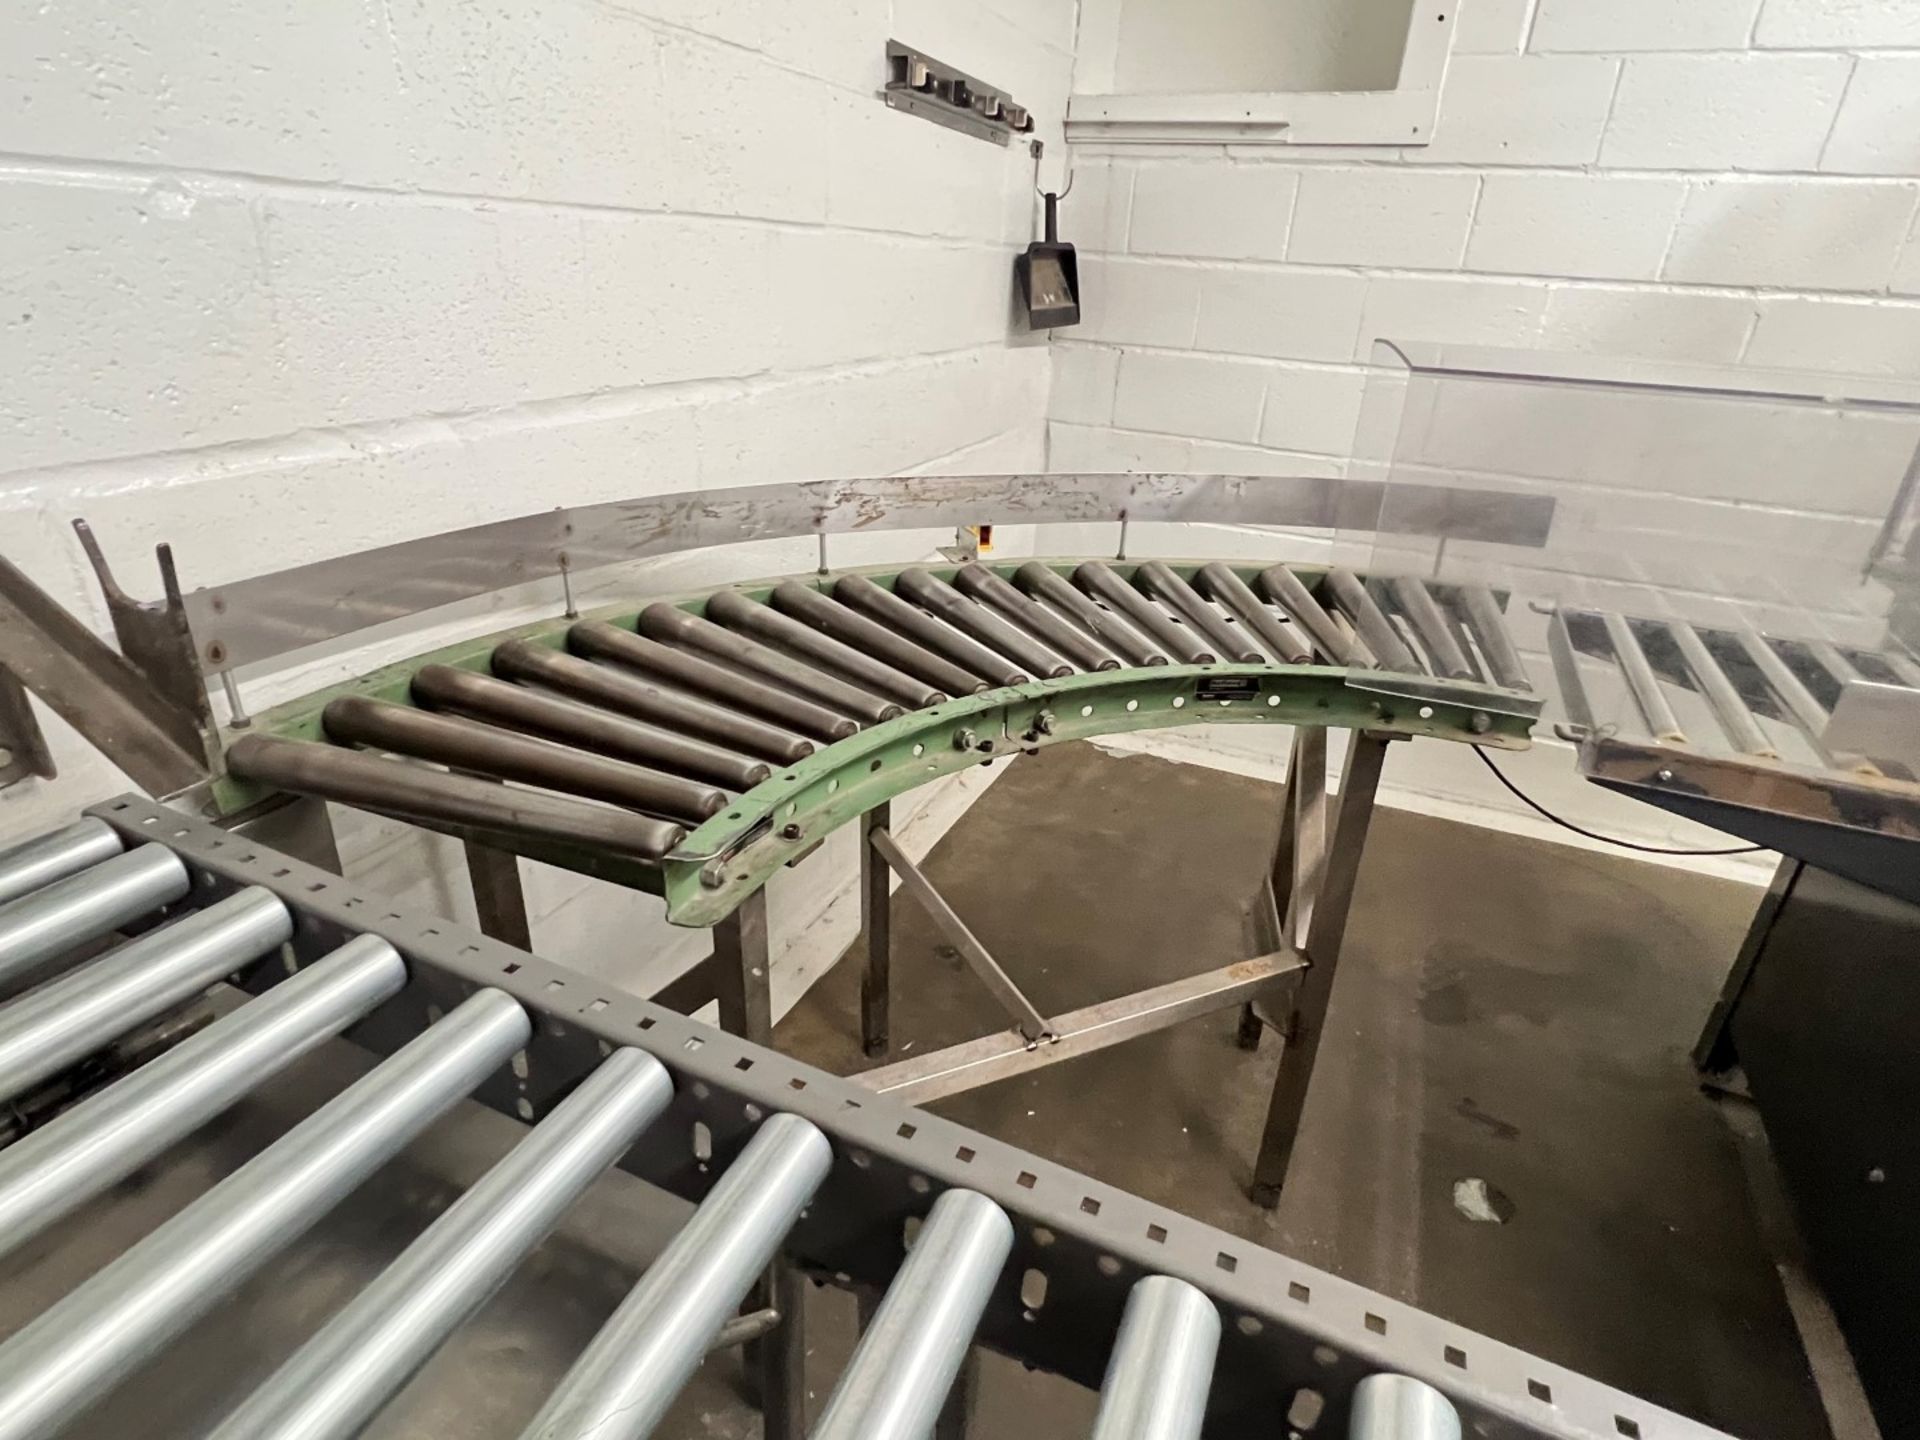 Roller Conveyors - Image 2 of 2